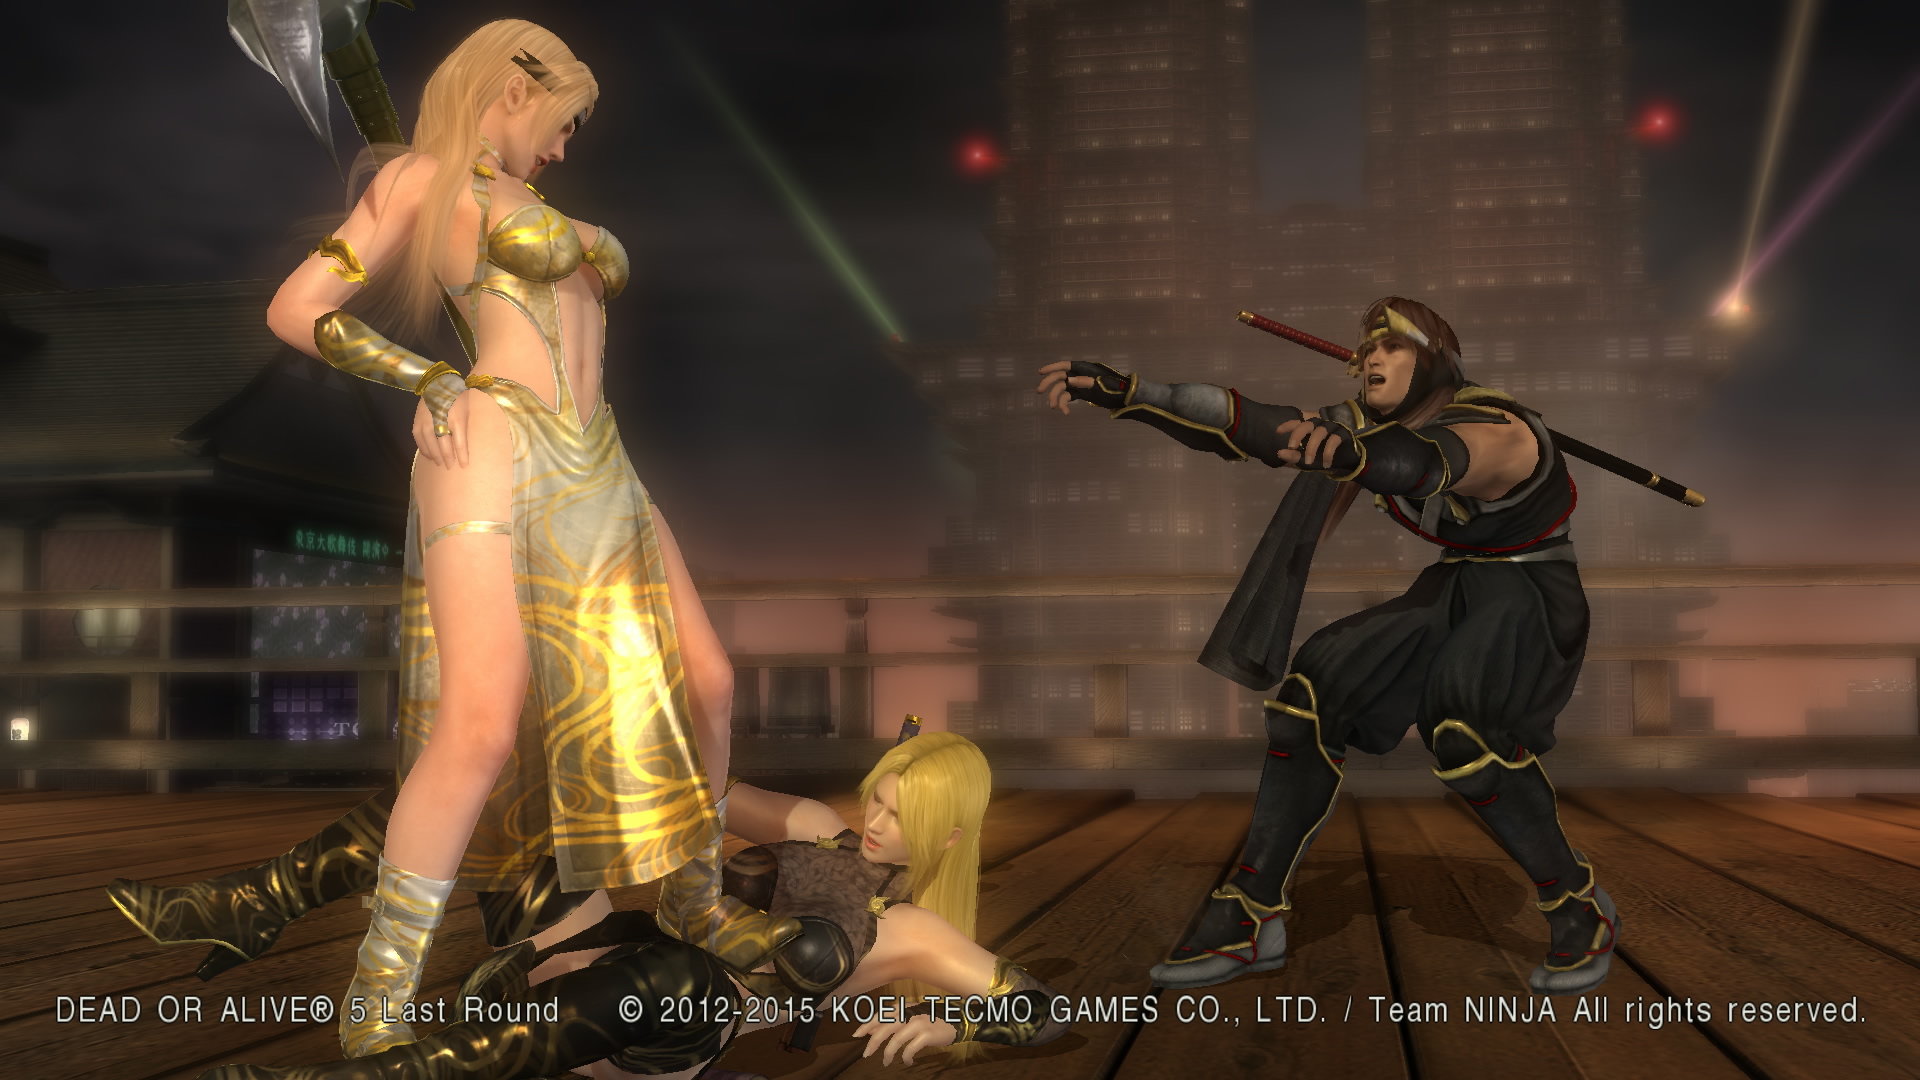 DEAD OR ALIVE 5 Last Round__1.jpg